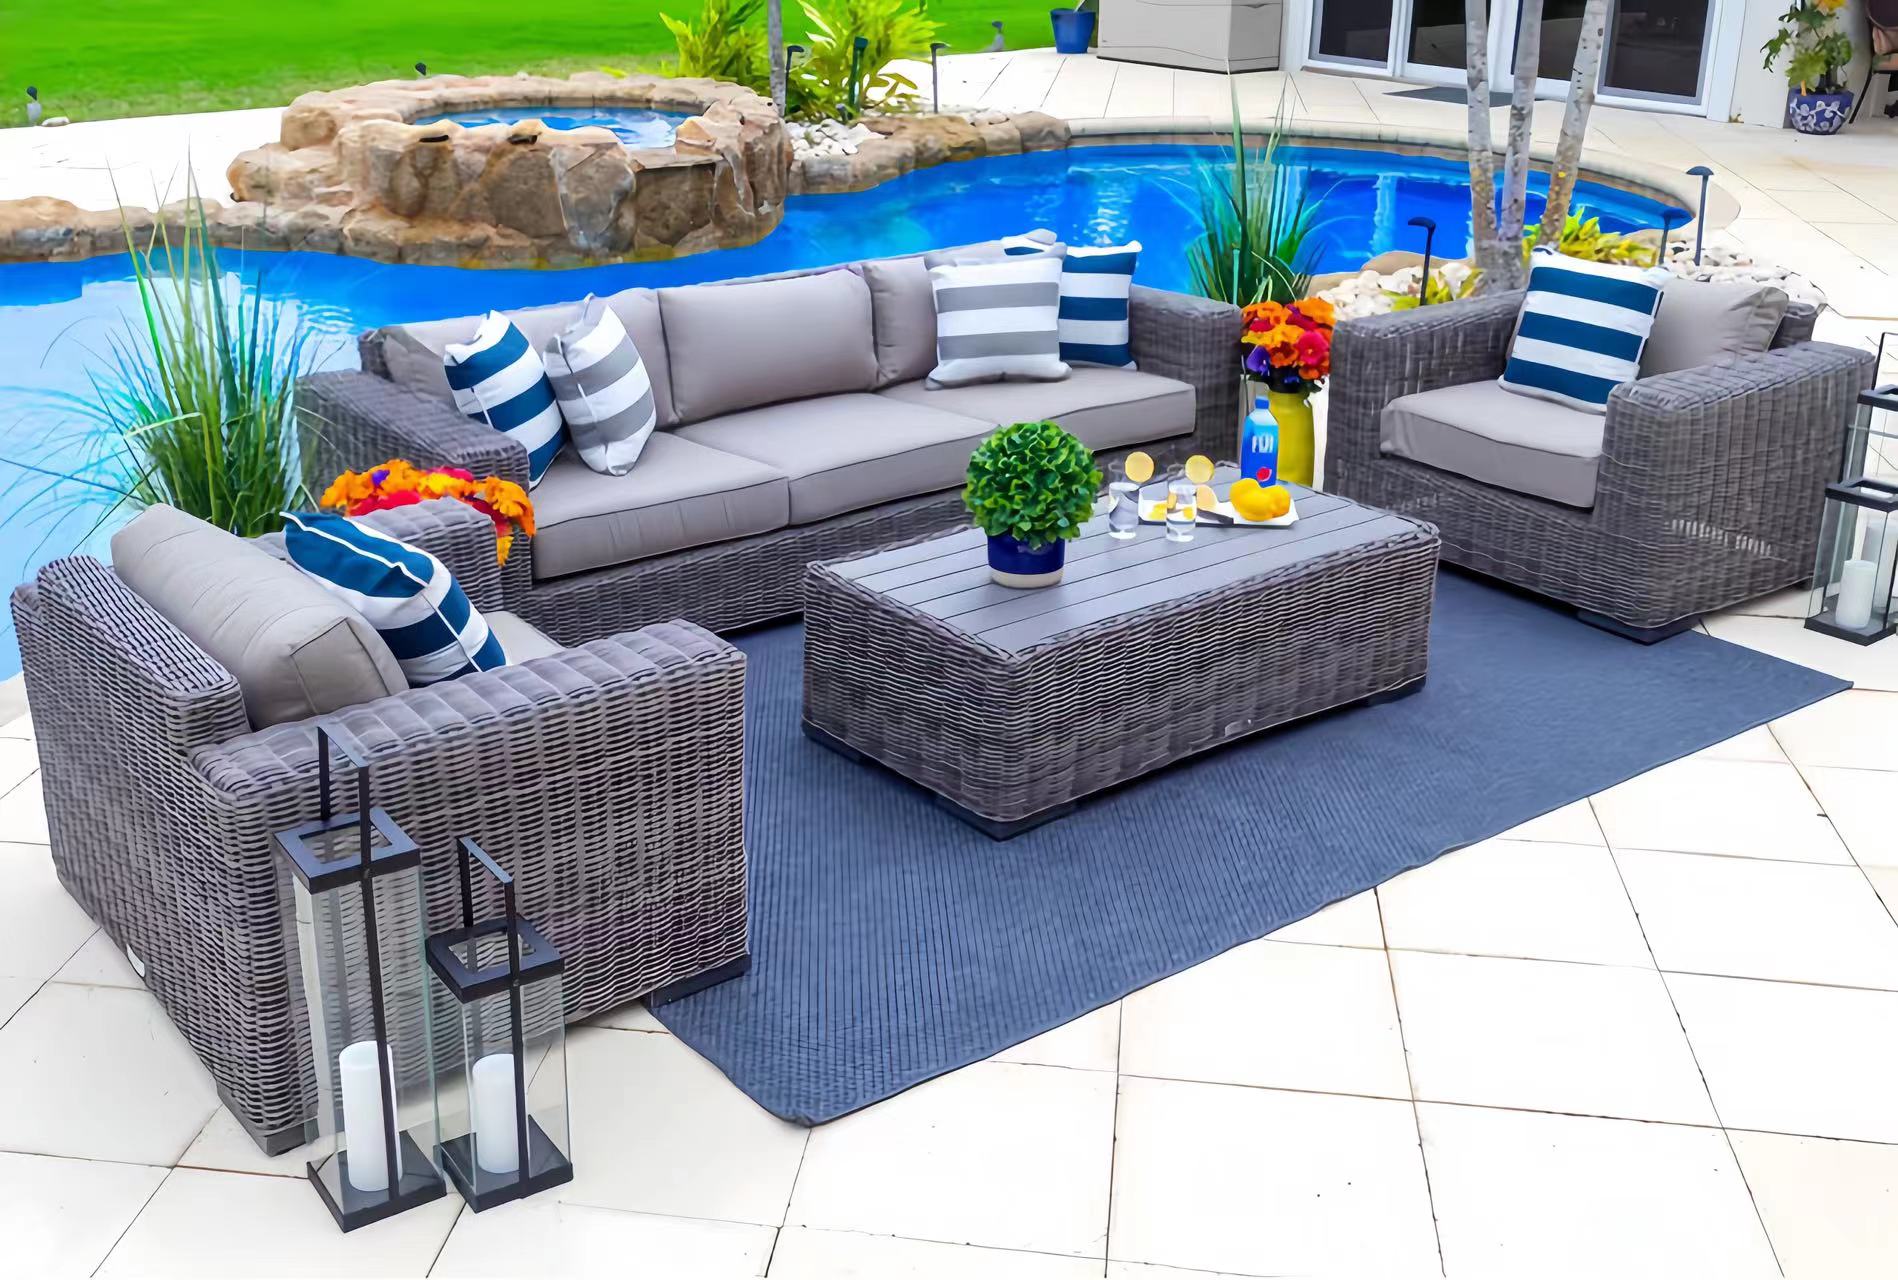 Outdoor Seating Group with Cushions